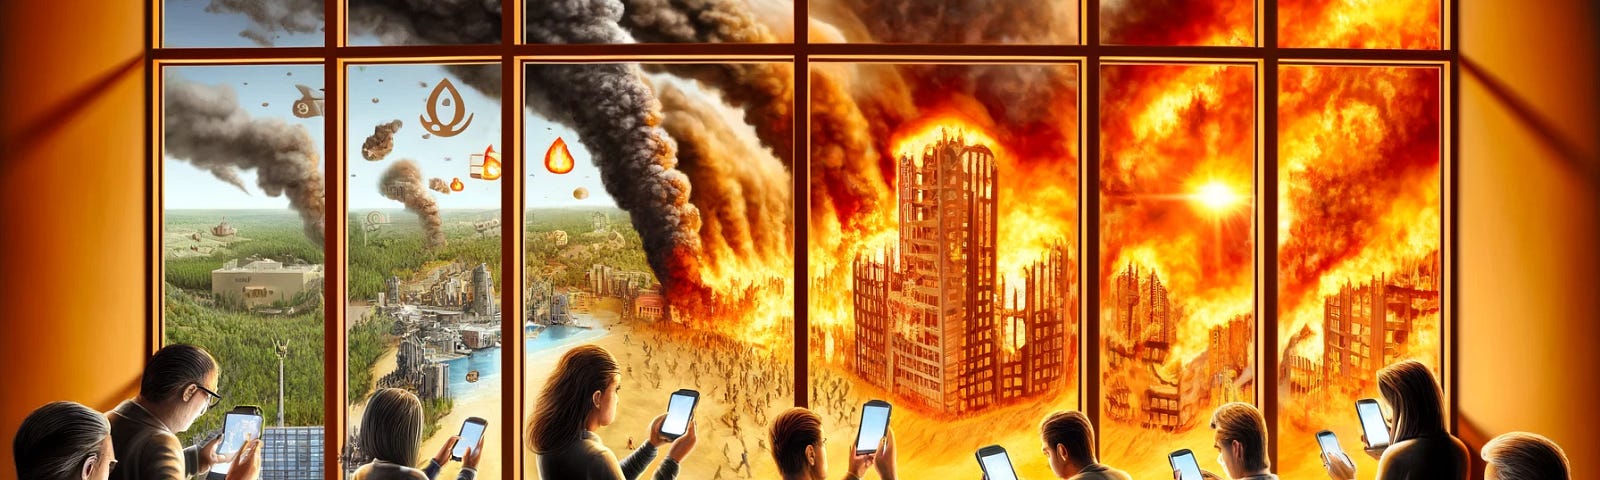 A group of people are absorbed in their smartphones, completely oblivious to the burning world outside the windows. The exterior shows raging fires, collapsing buildings, and dead forests, symbolizing environmental destruction. Inside, symbols of money and oil are scattered around, highlighting the causes of the devastation. The image conveys a strong sense of urgency and the consequences of ignoring reality.